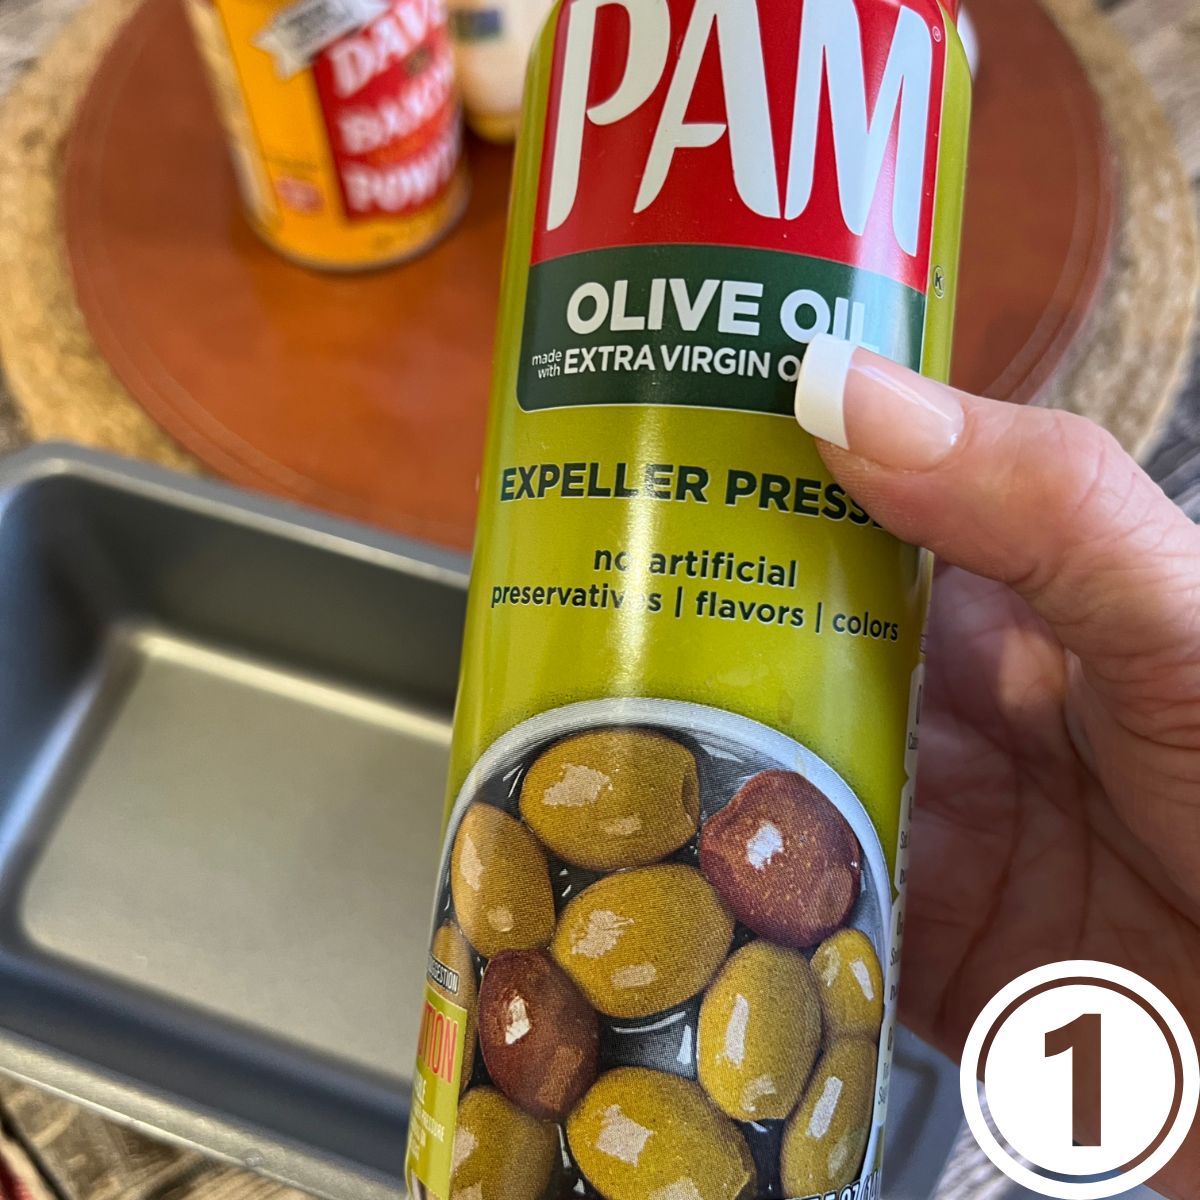 A hand holding a can of spray olive oil